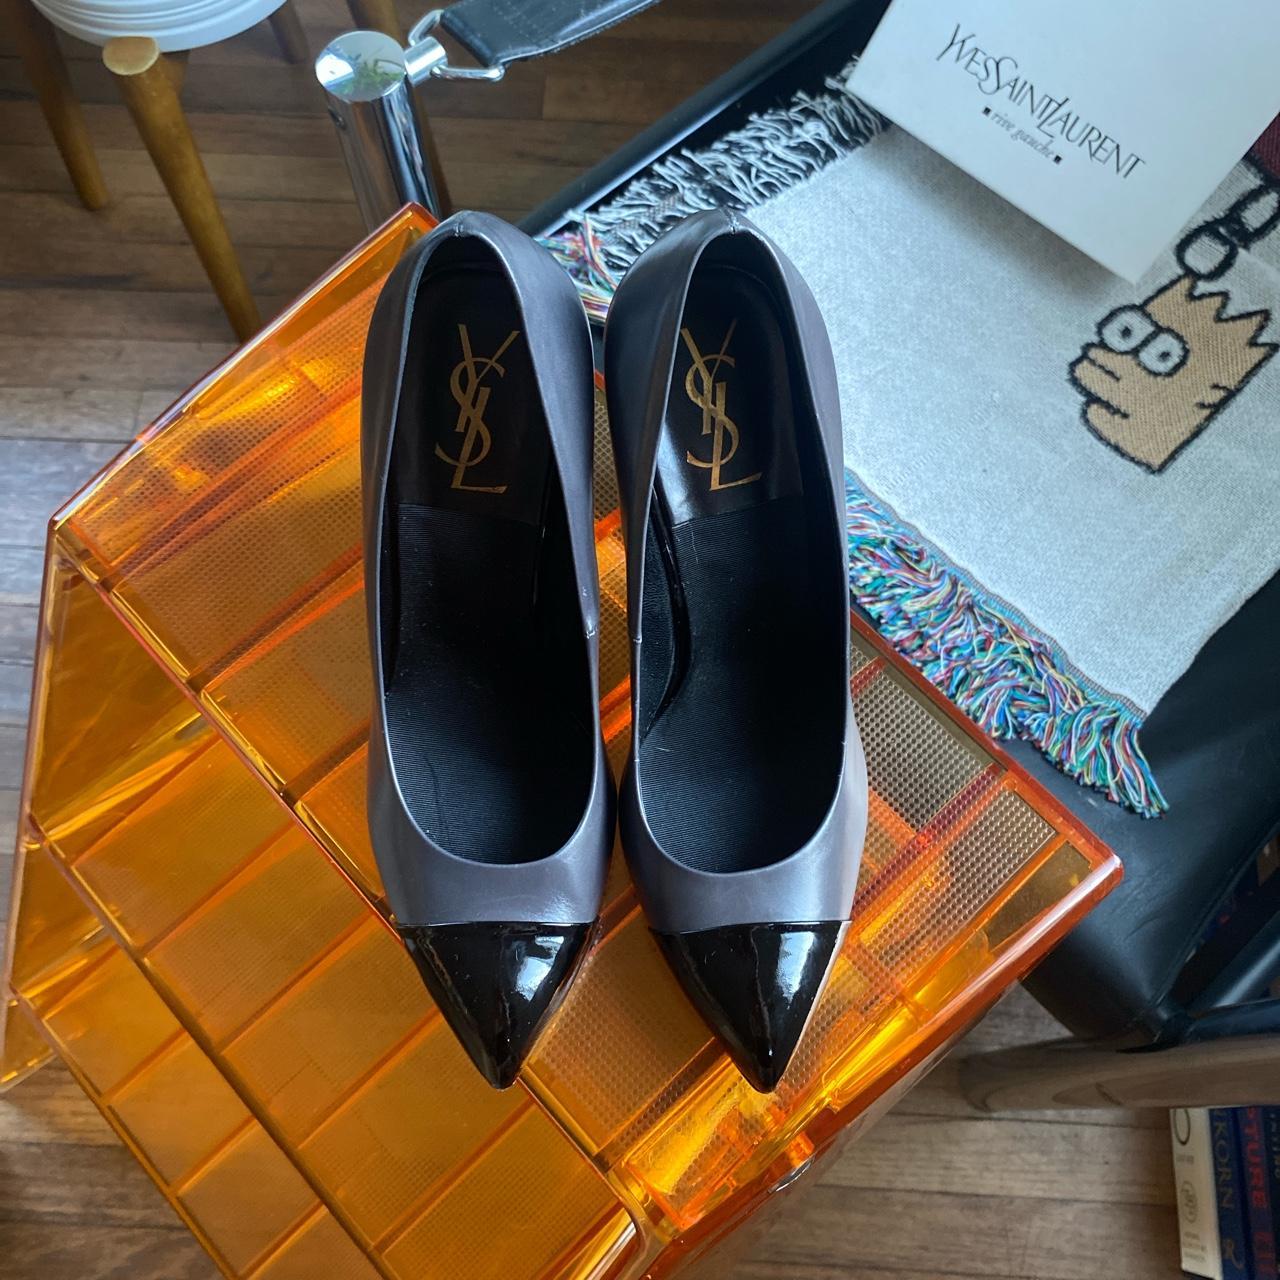 YSL shoes real vs fake. How to spot fake Saint Laurent opyum heels 